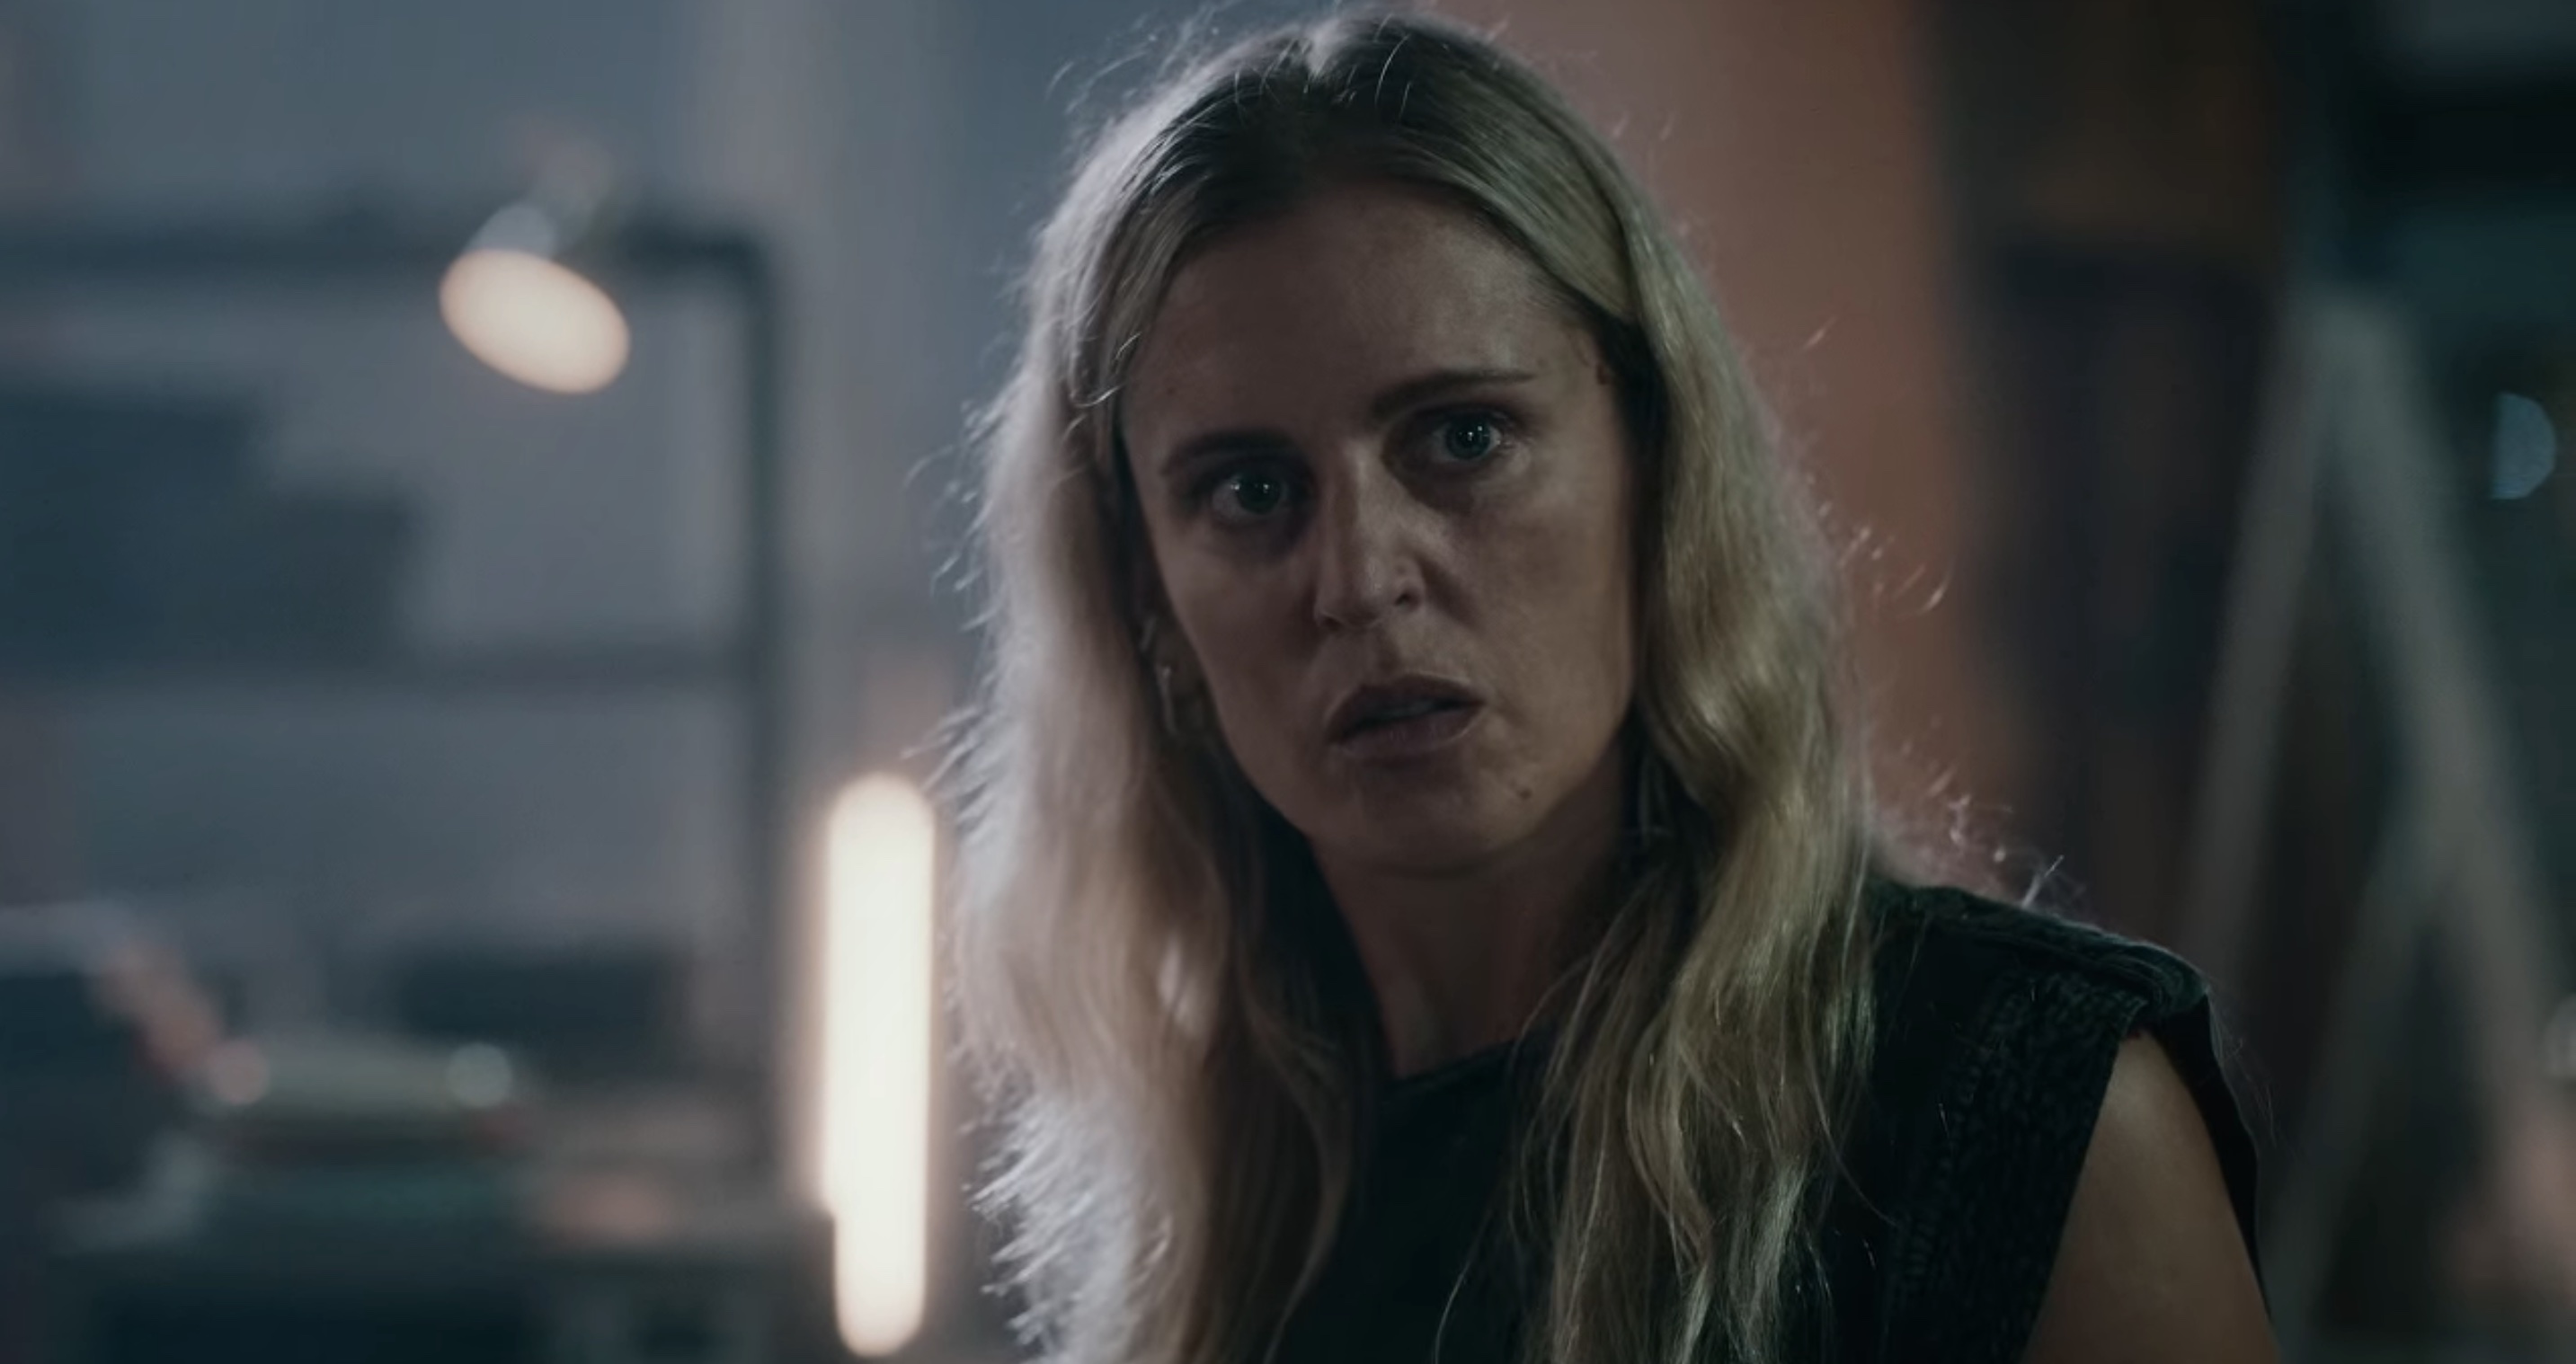 Who Is Erin Carter Cast on Netflix - Denise Gough as Lena Campbell